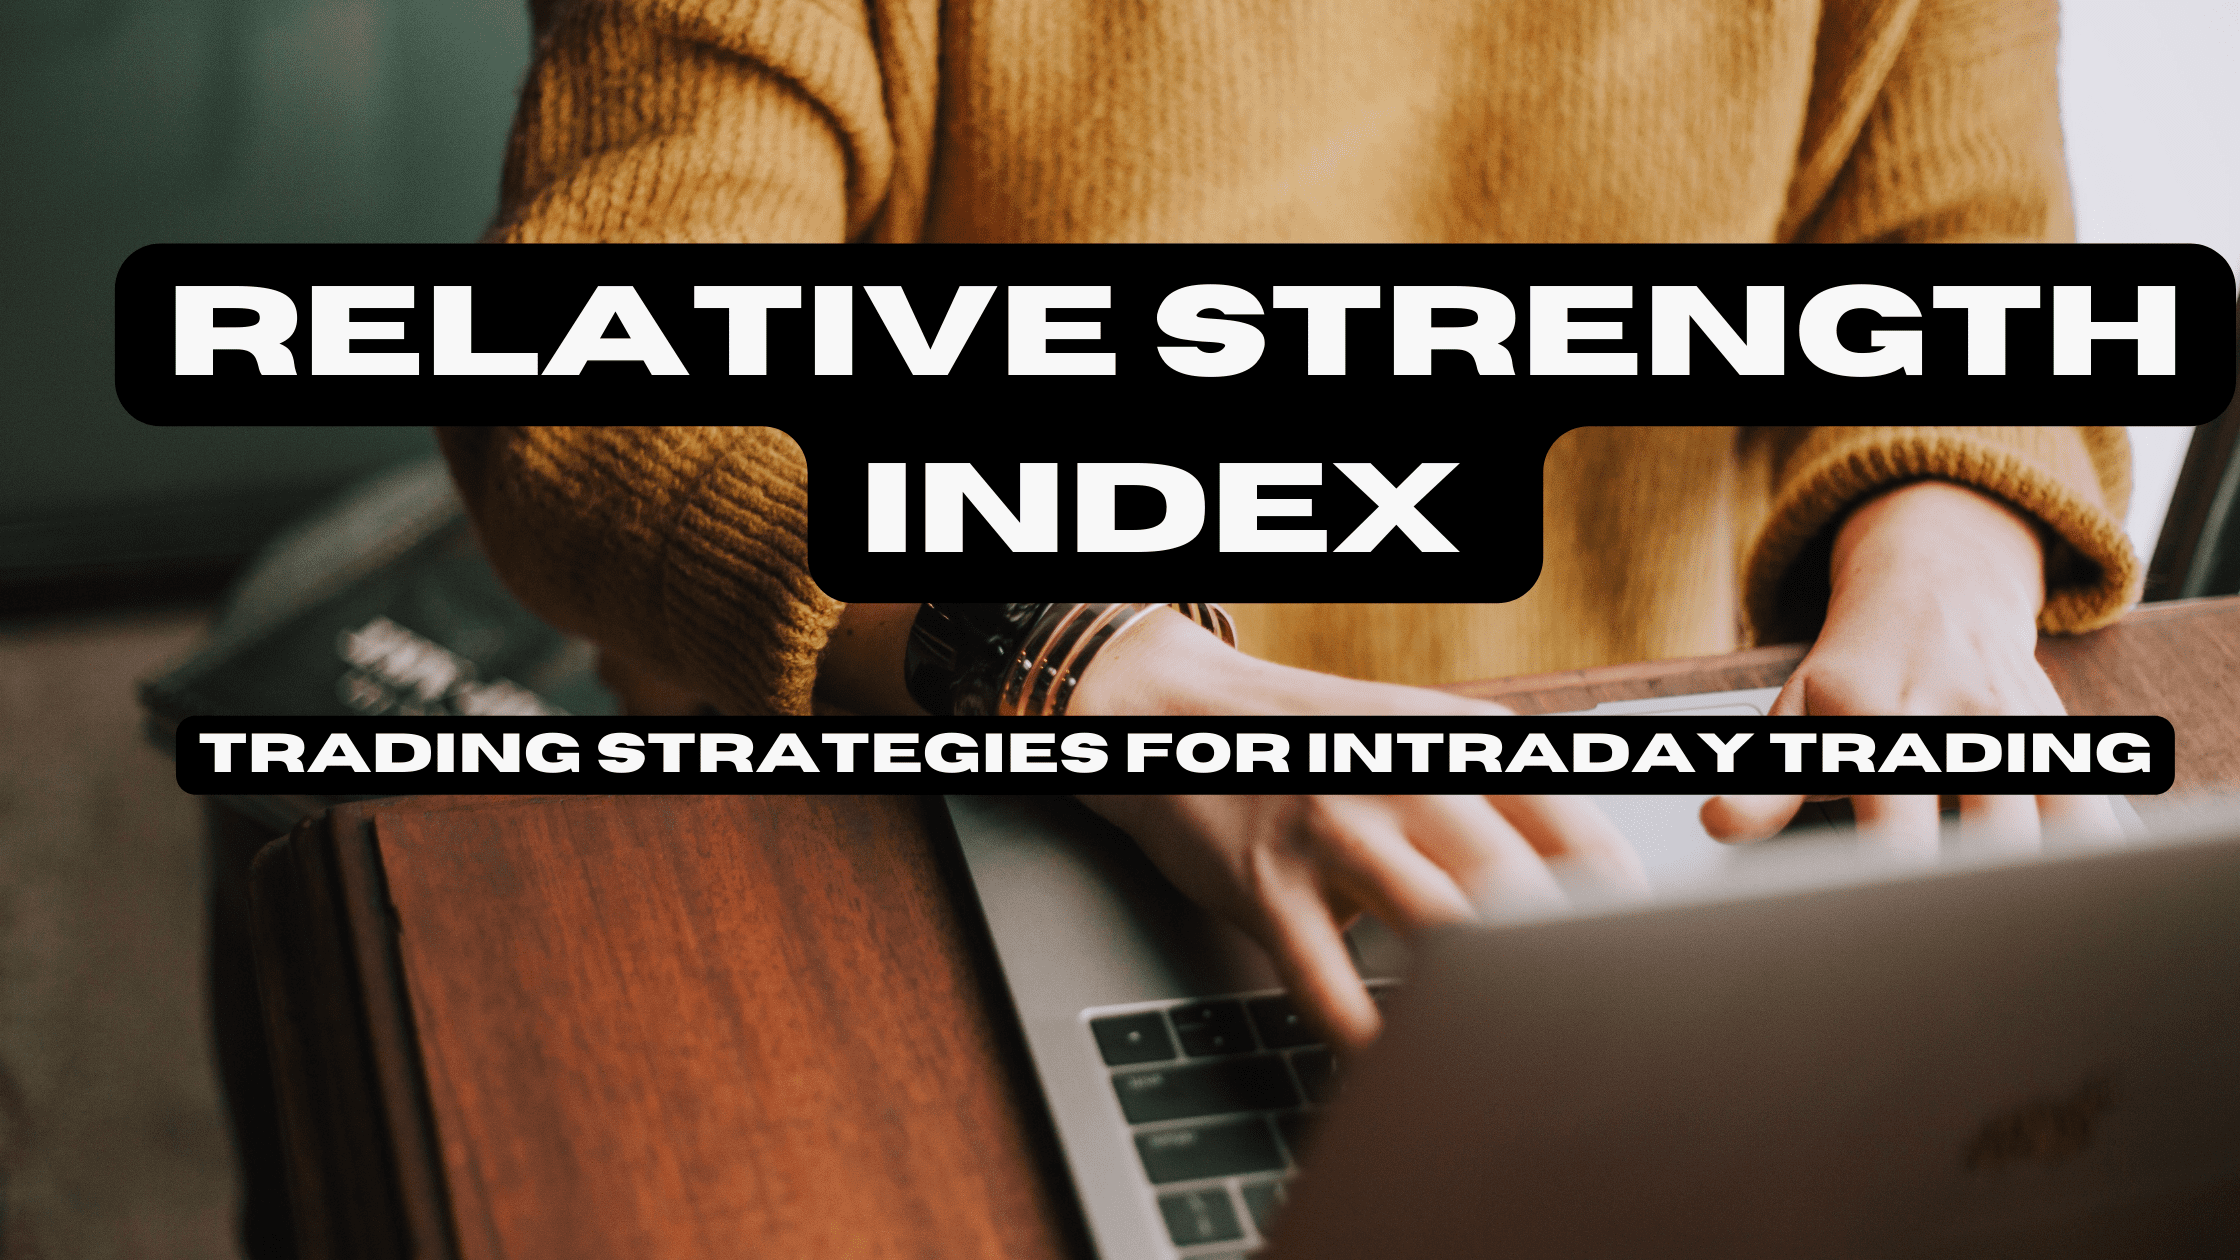 Relative Strength Index Trading Strategies for Intraday Trading